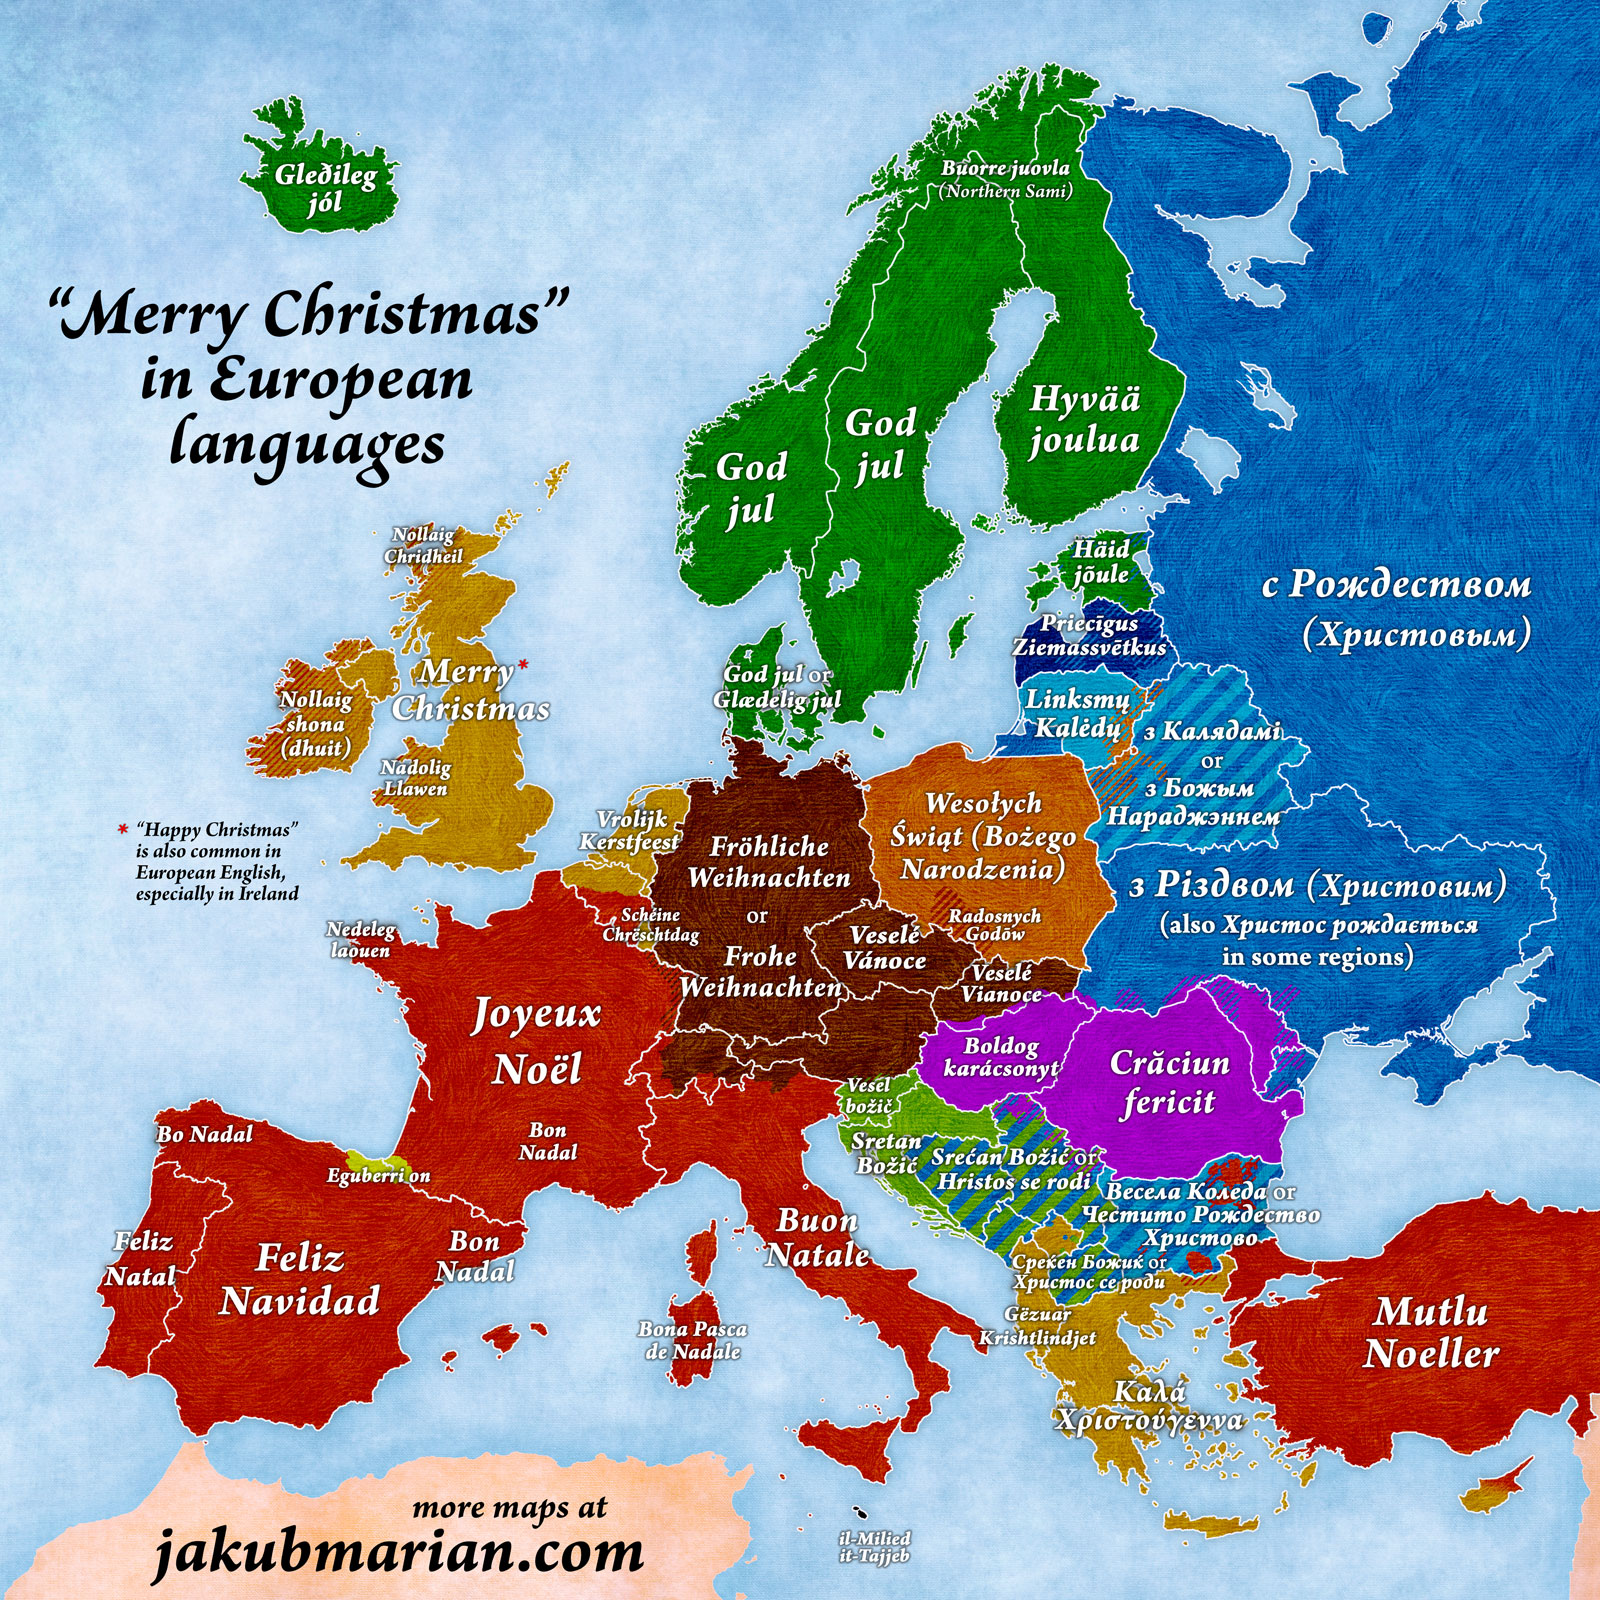 Merry Christmas' in European languages